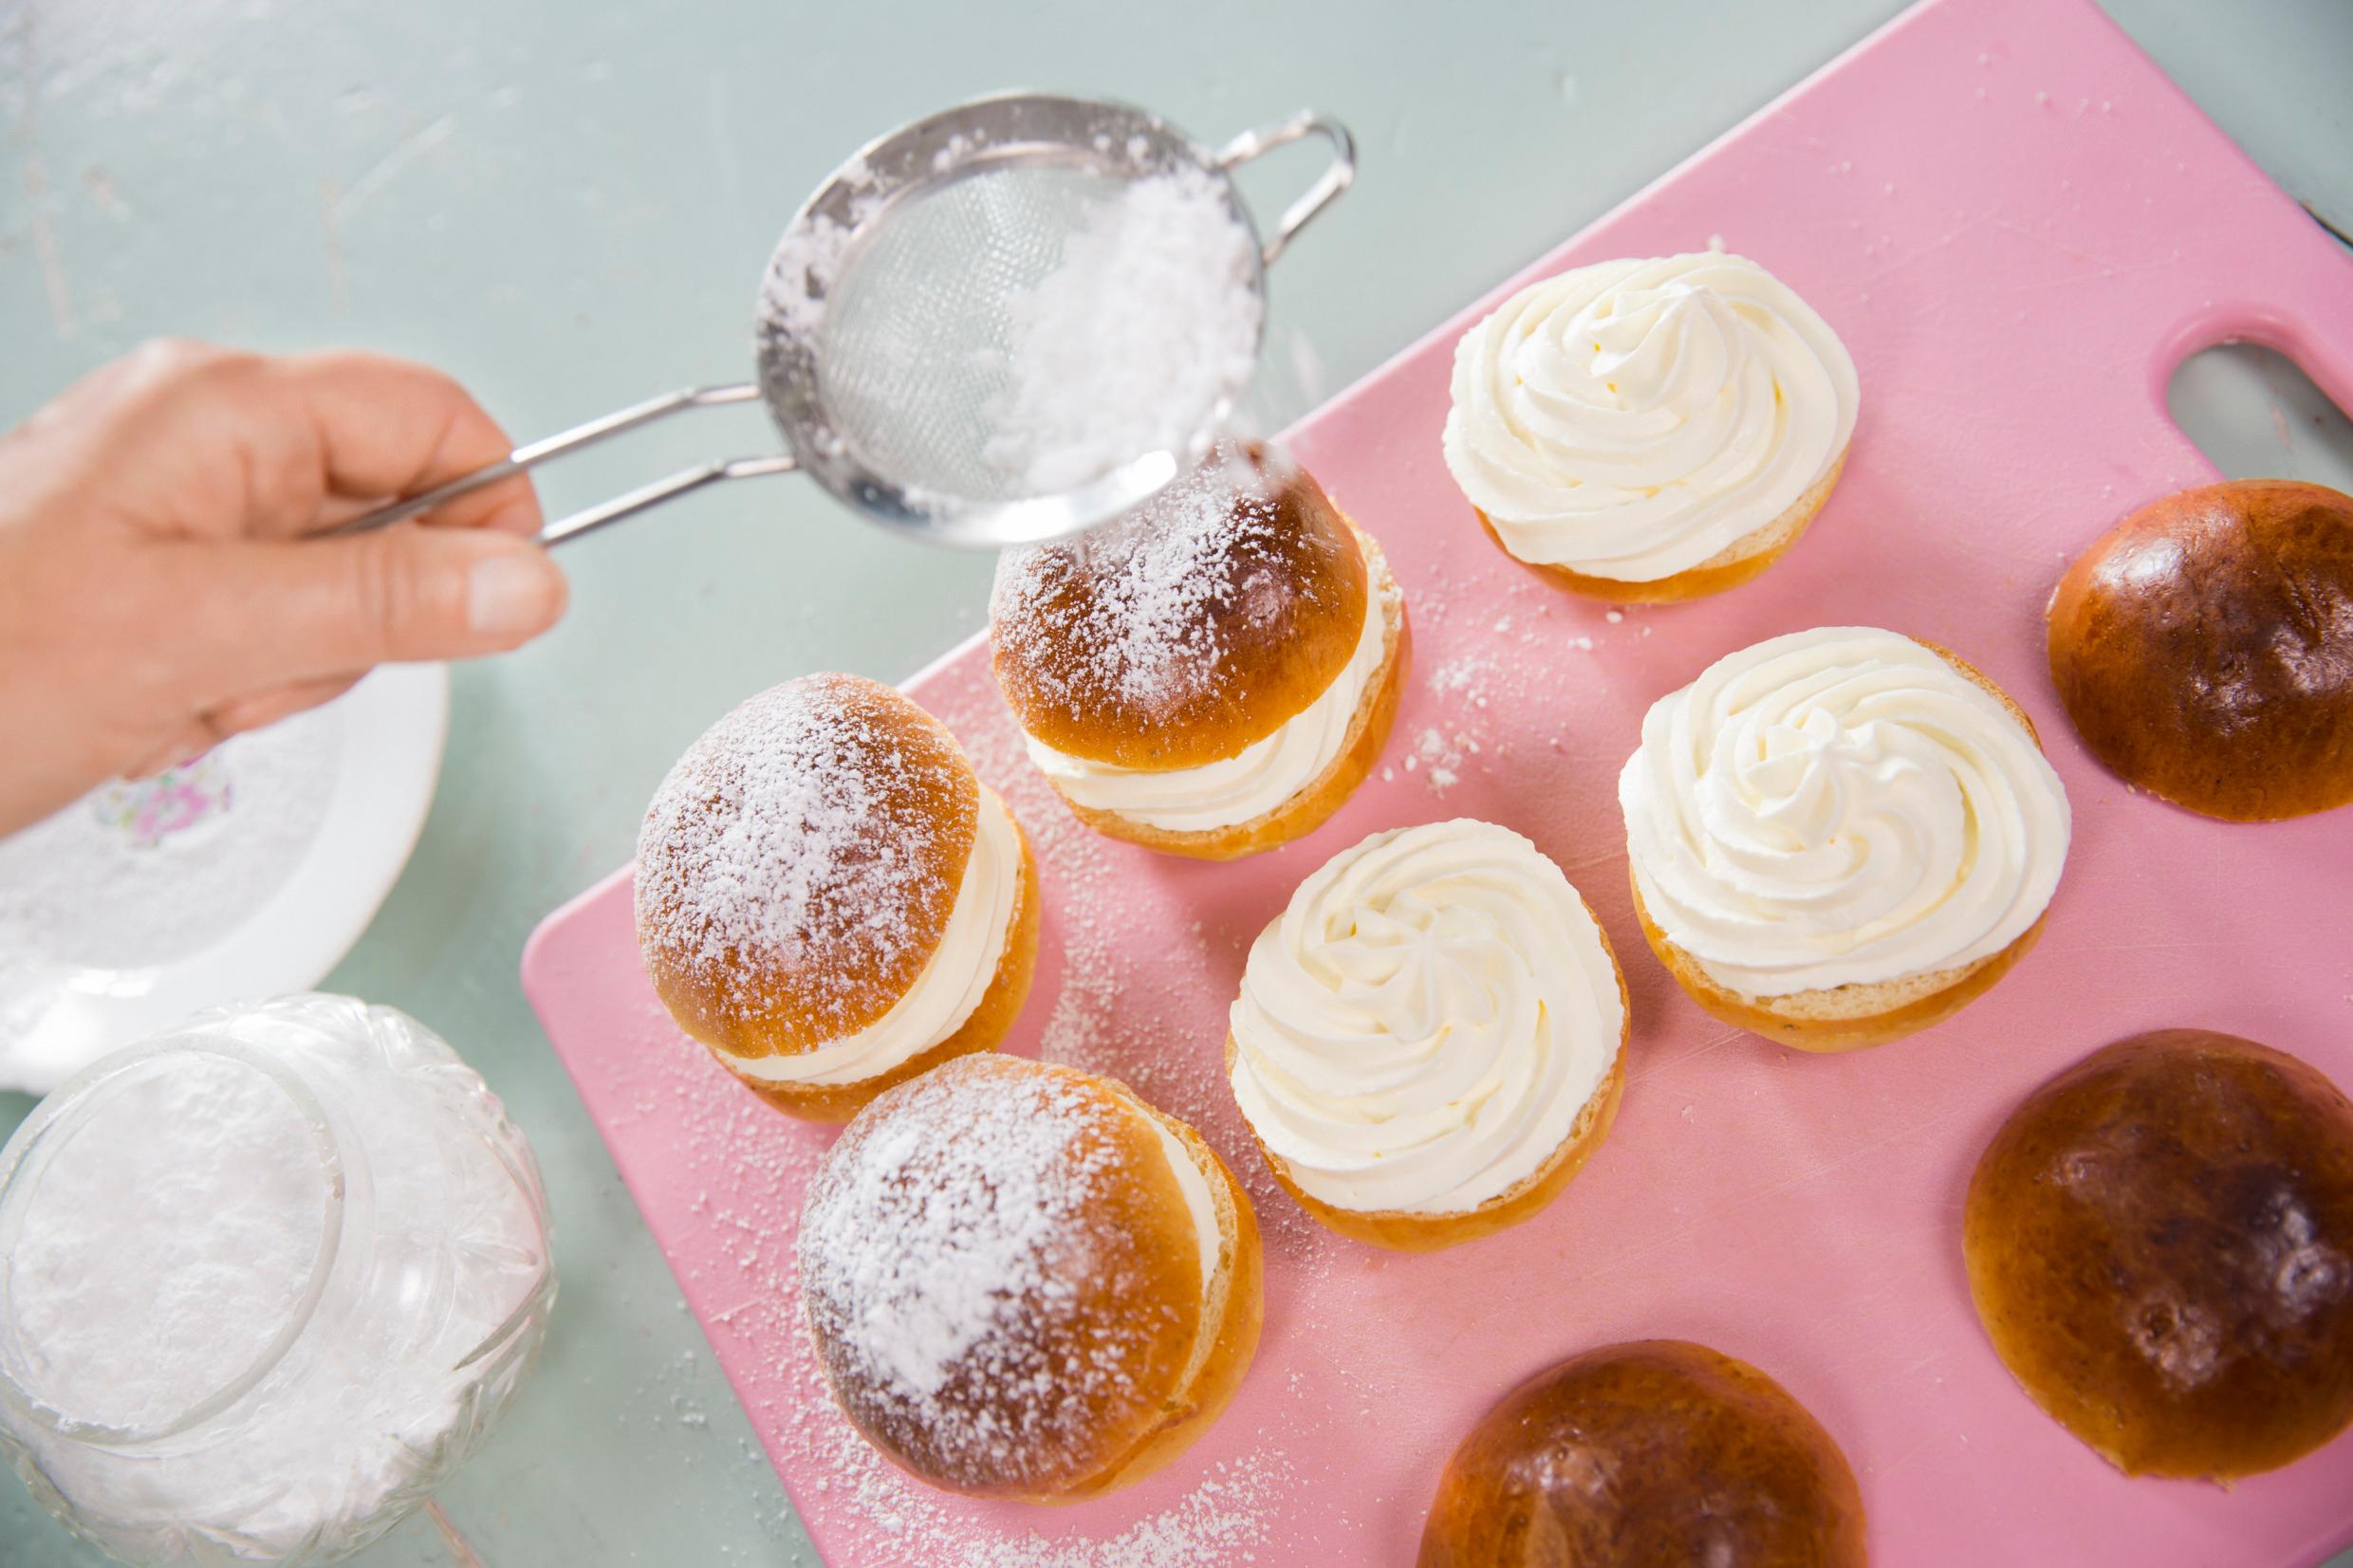 Semla buns being made on a pink board. A hand is seen powdering cream-filled buns with icing sugar.